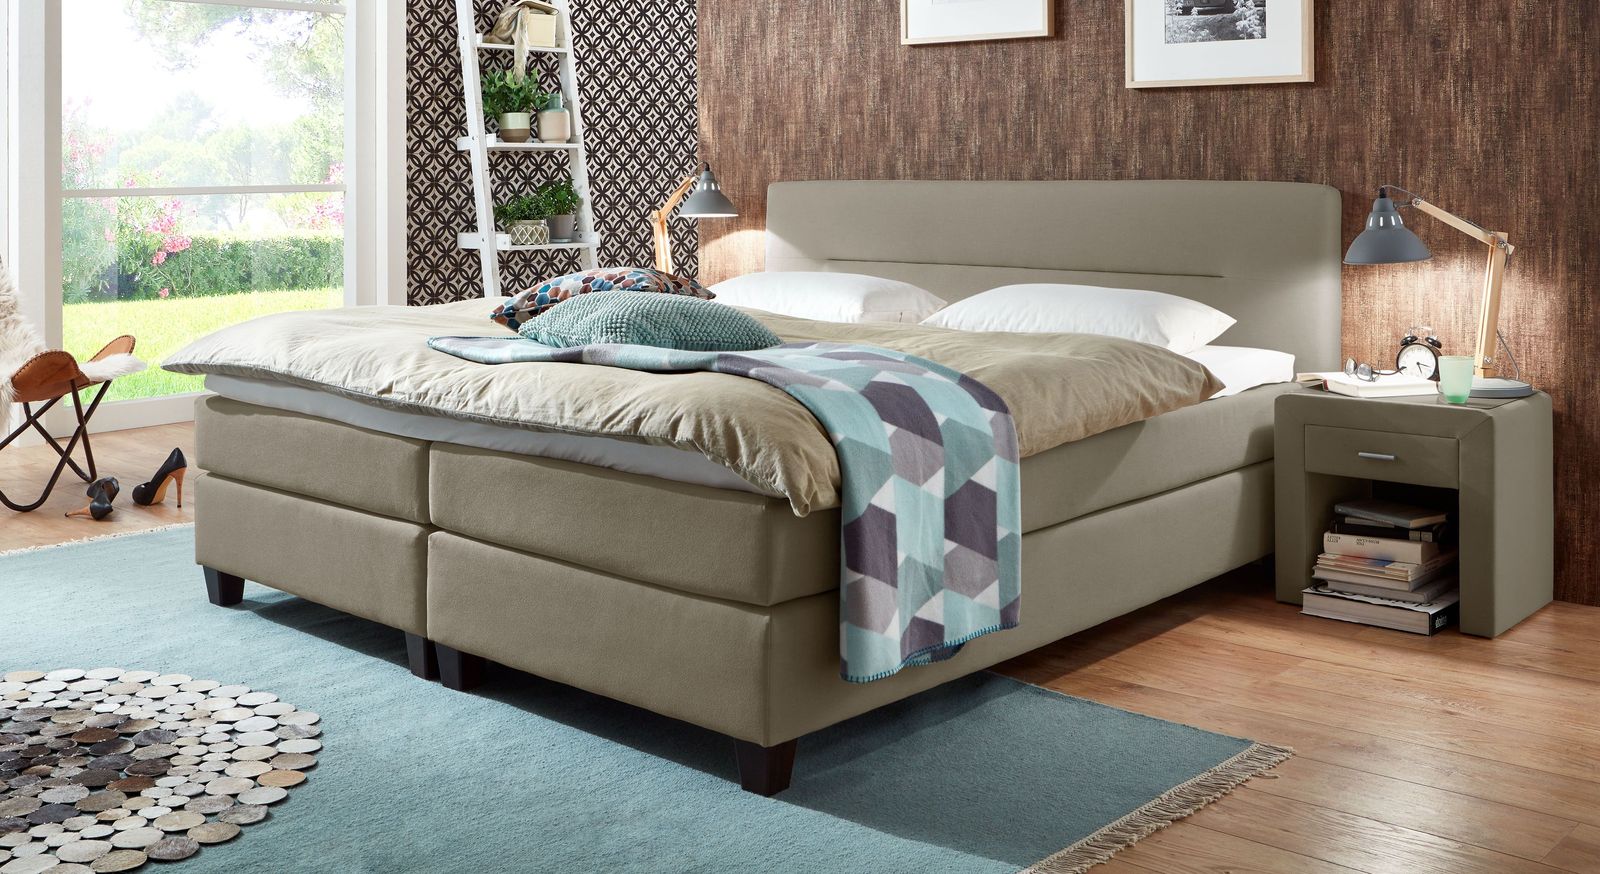 53 cm hohes Boxspringbett Clarksville aus Webstoff in Taupe